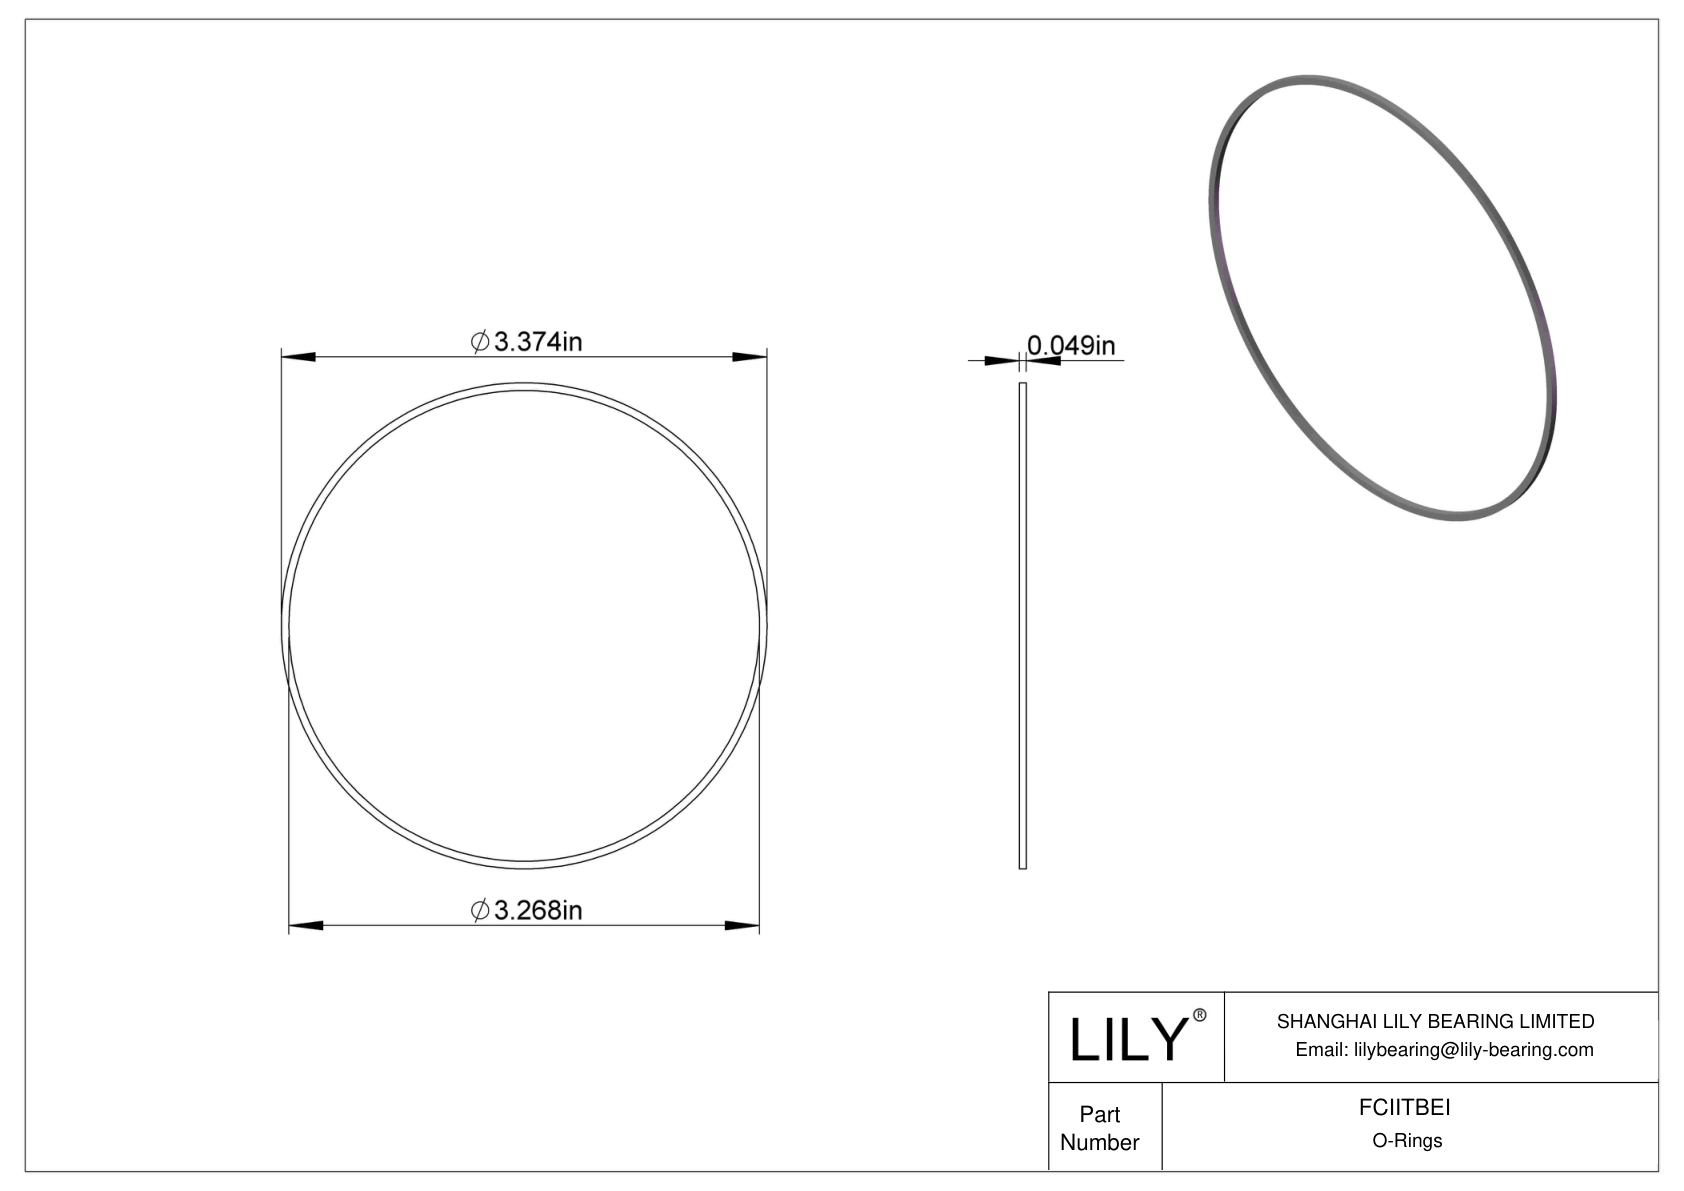 FCIITBEI O-Ring Backup Rings cad drawing